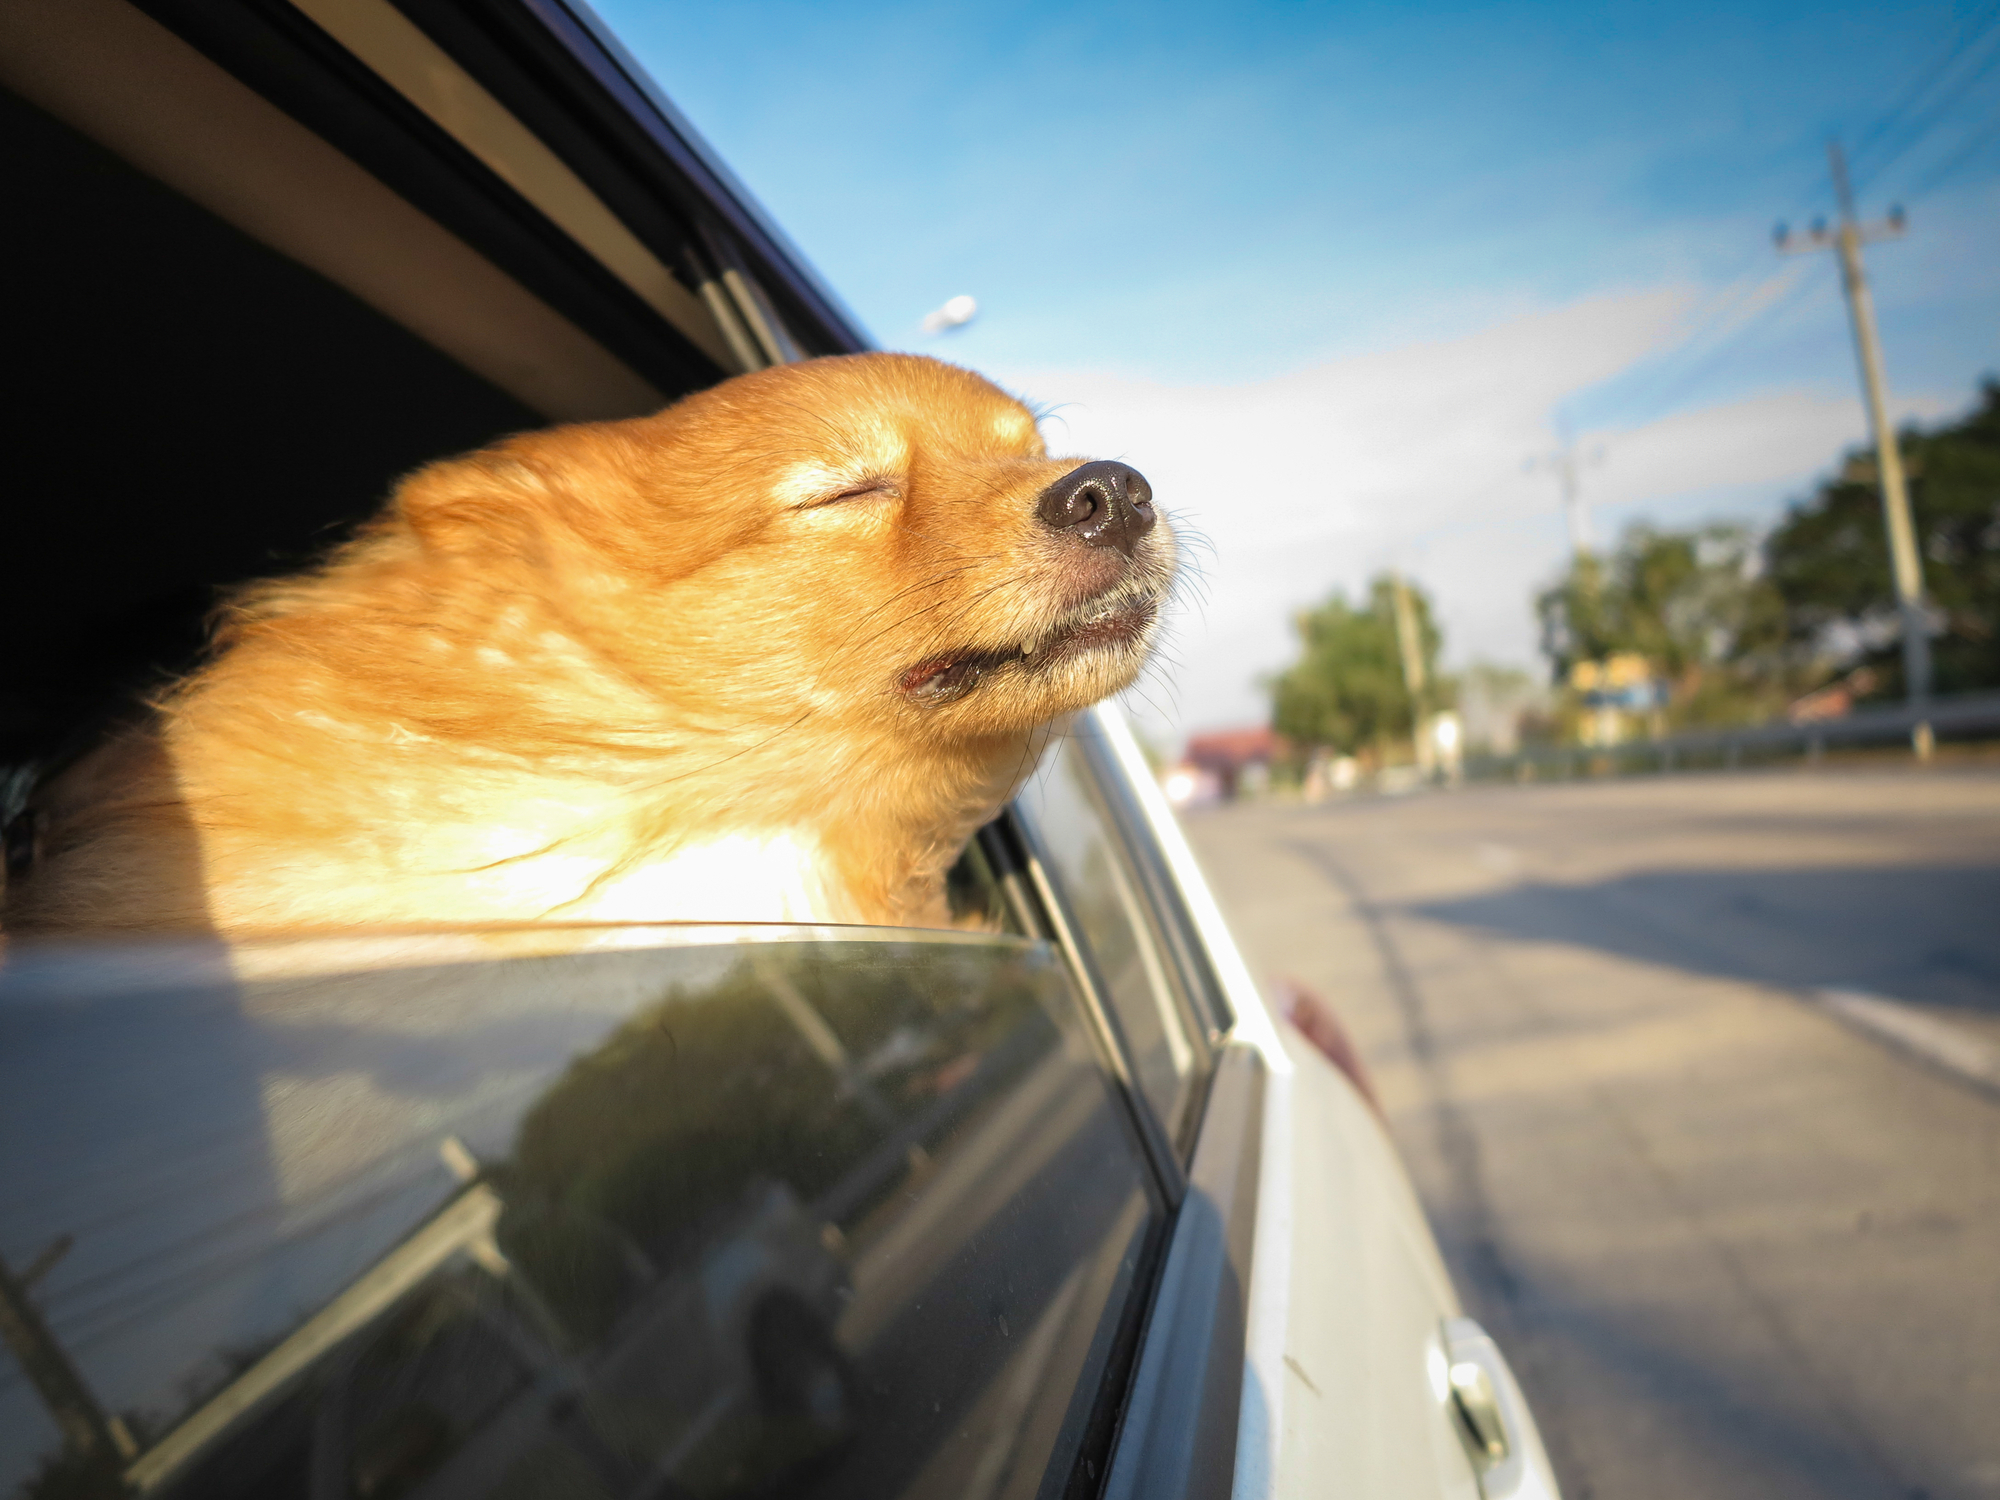 Dog is not pinched by car side window, happy dog